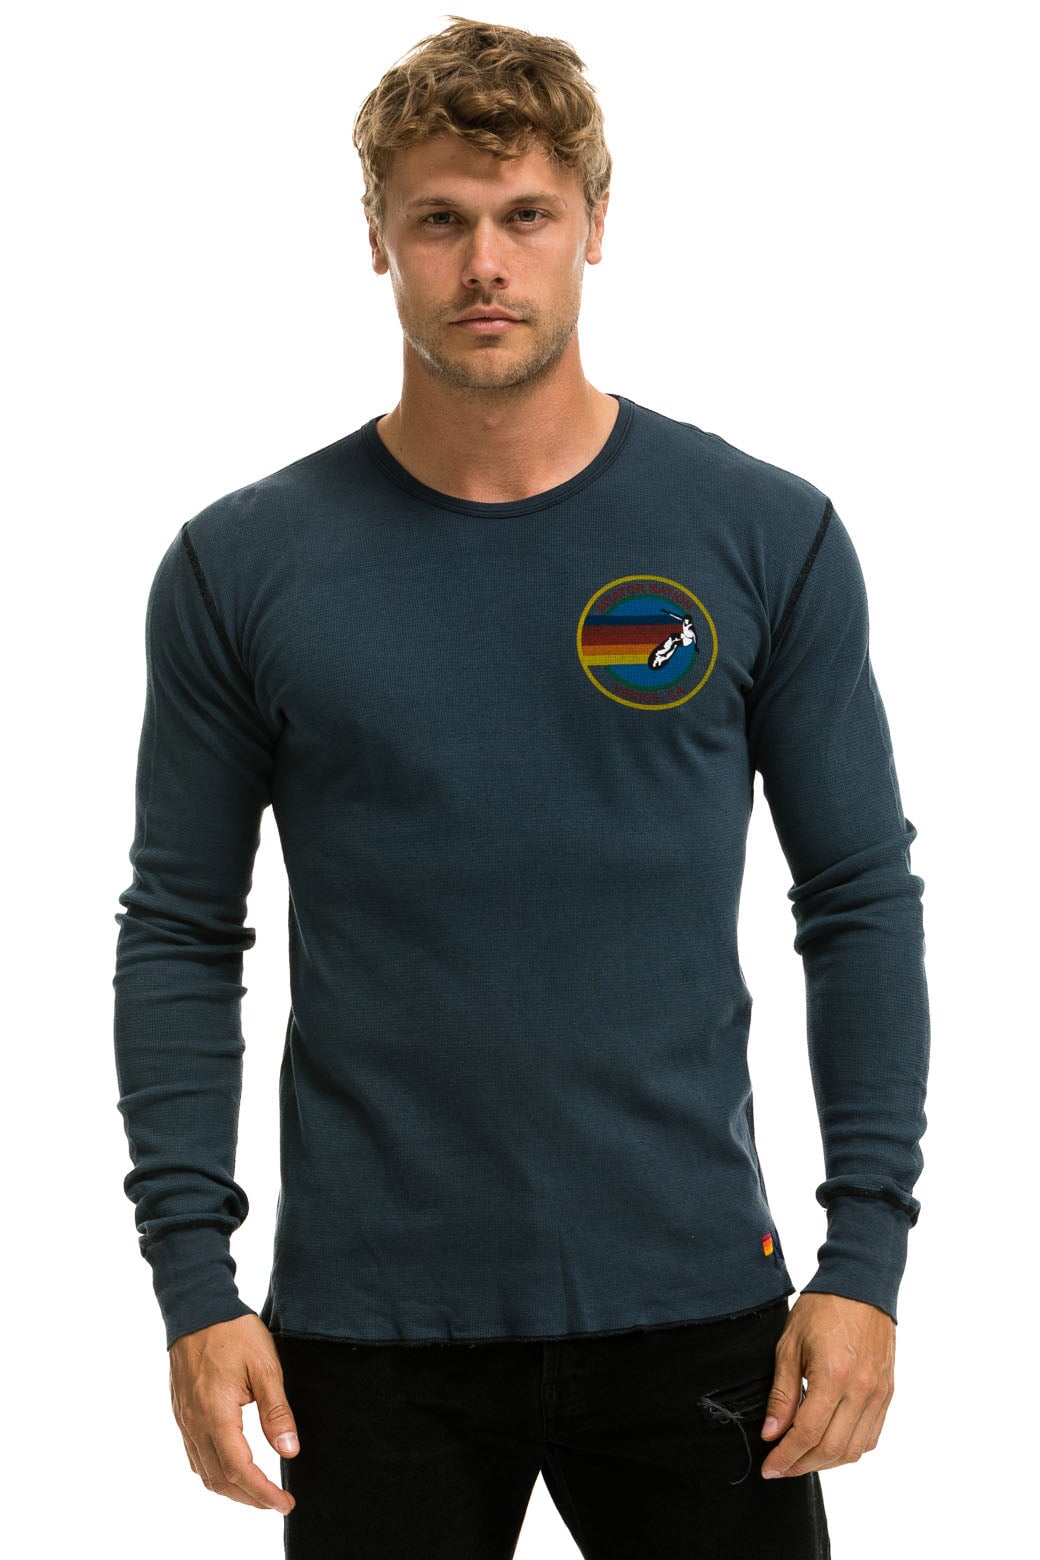 AVIATOR NATION VENICE THERMAL - CHARCOAL Thermal Aviator Nation 